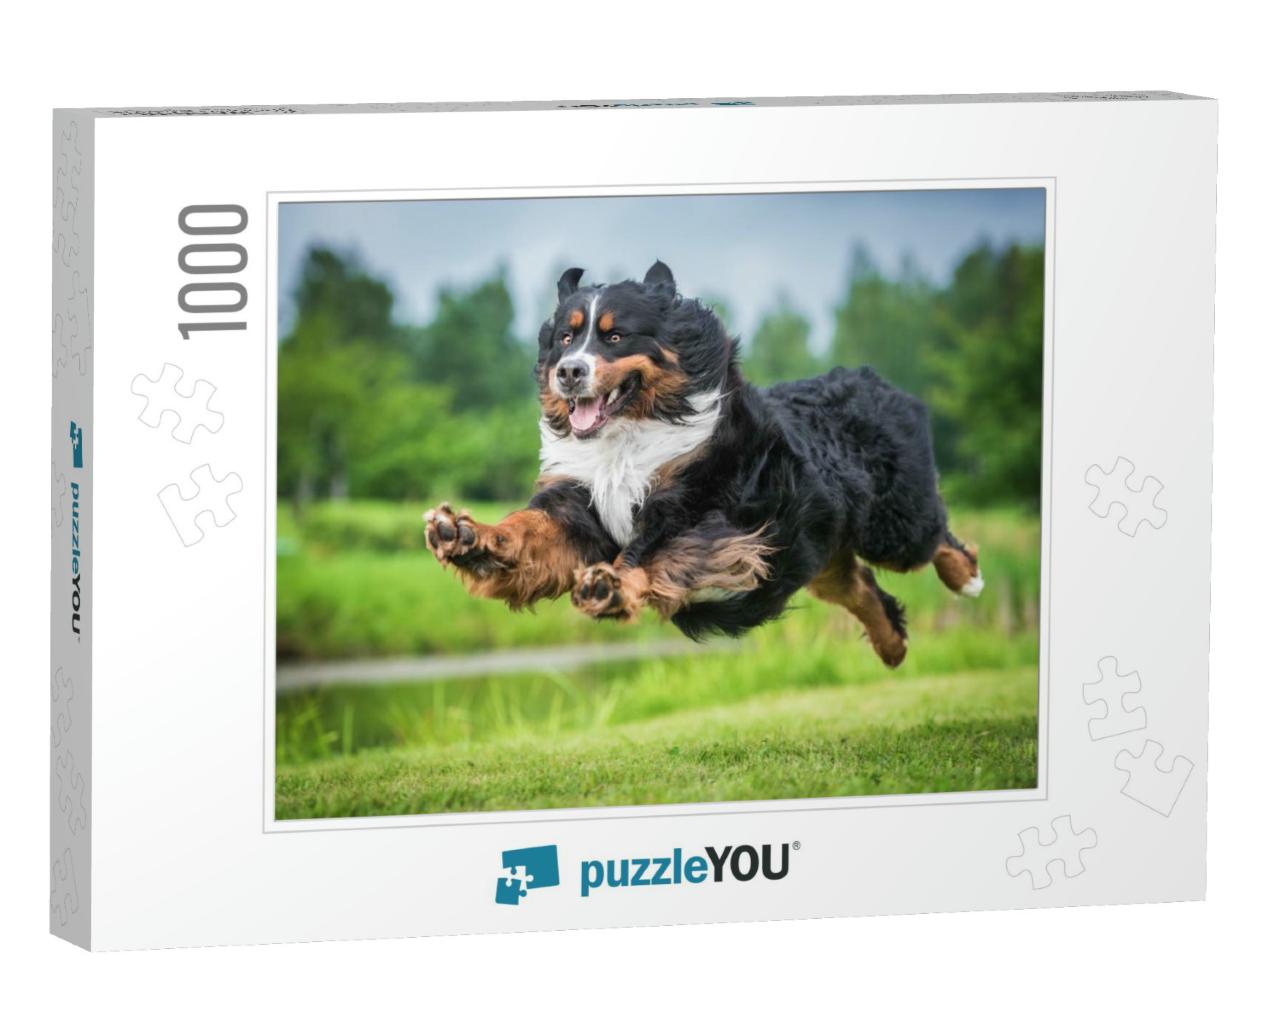 Bernese Mountain Dog Flying in the Air... Jigsaw Puzzle with 1000 pieces